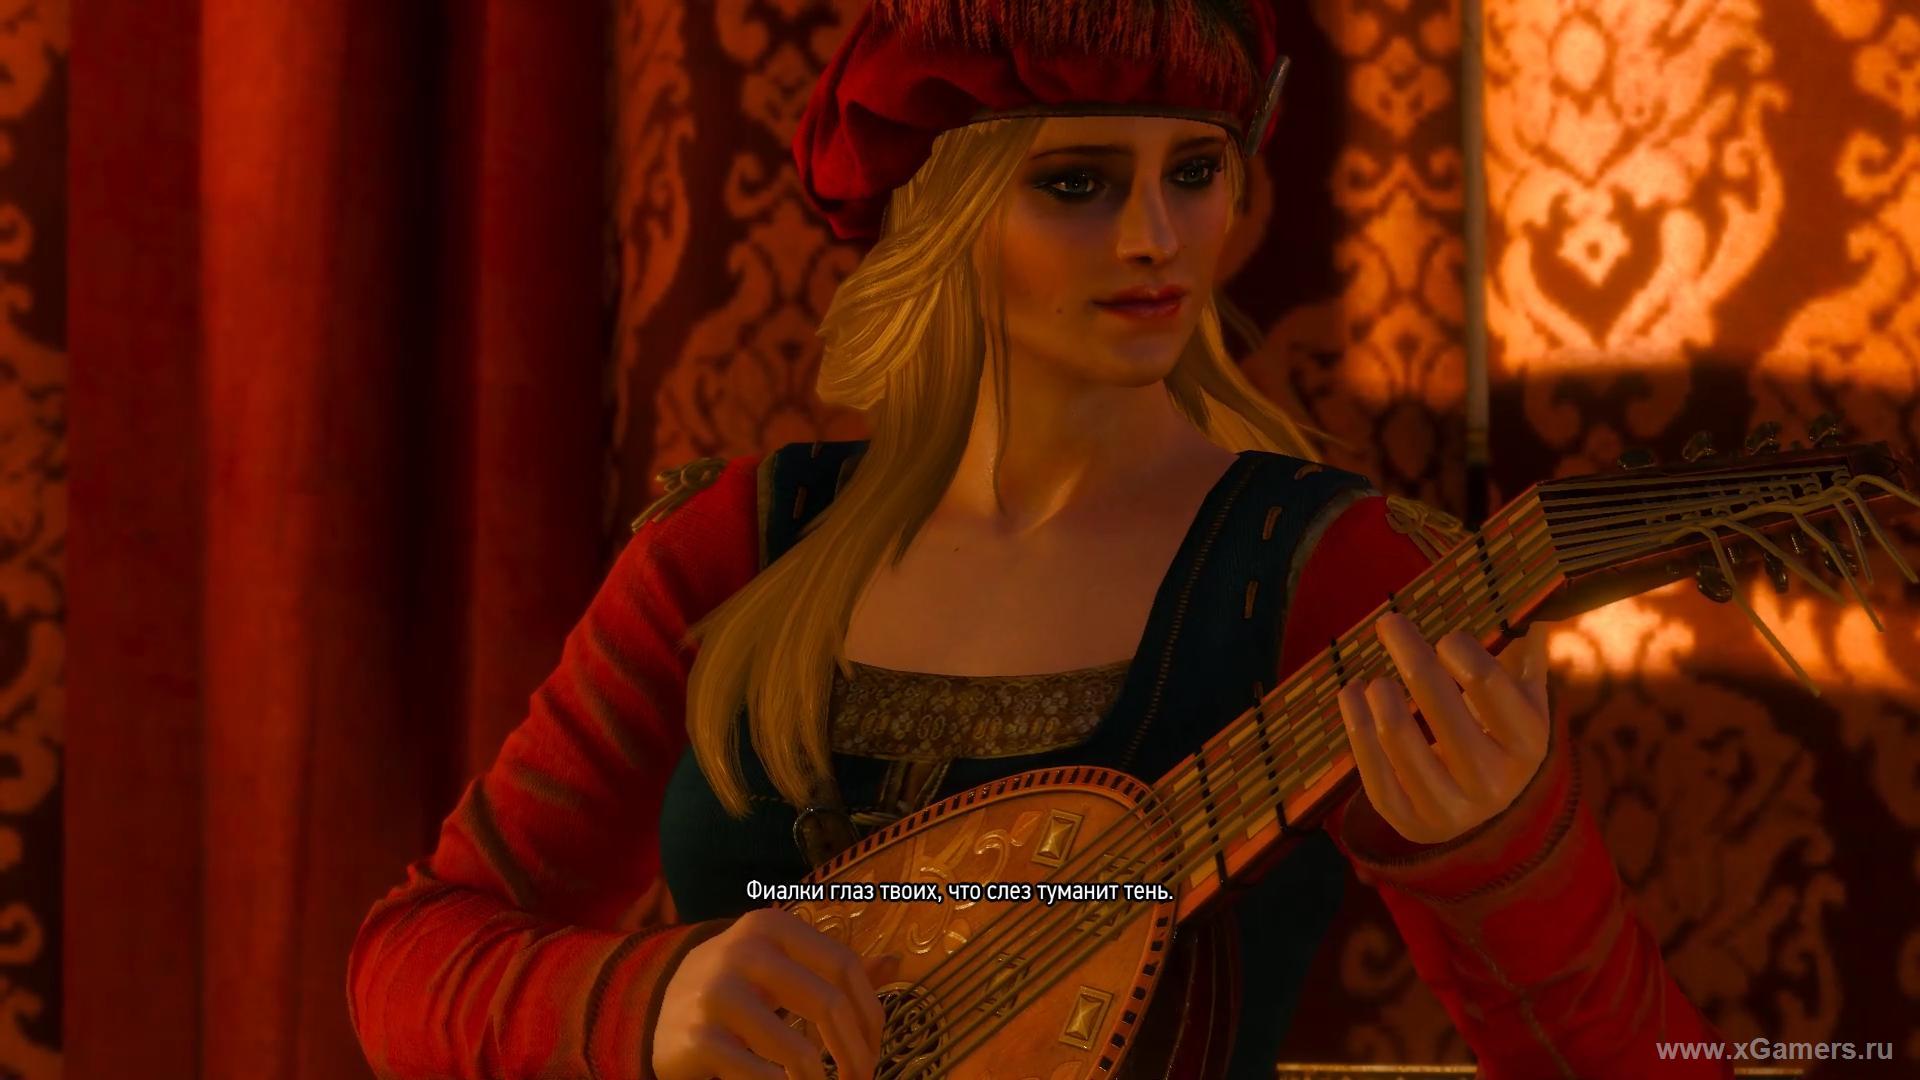 How to pass the quest in the Witcher 3 Broken Flowers